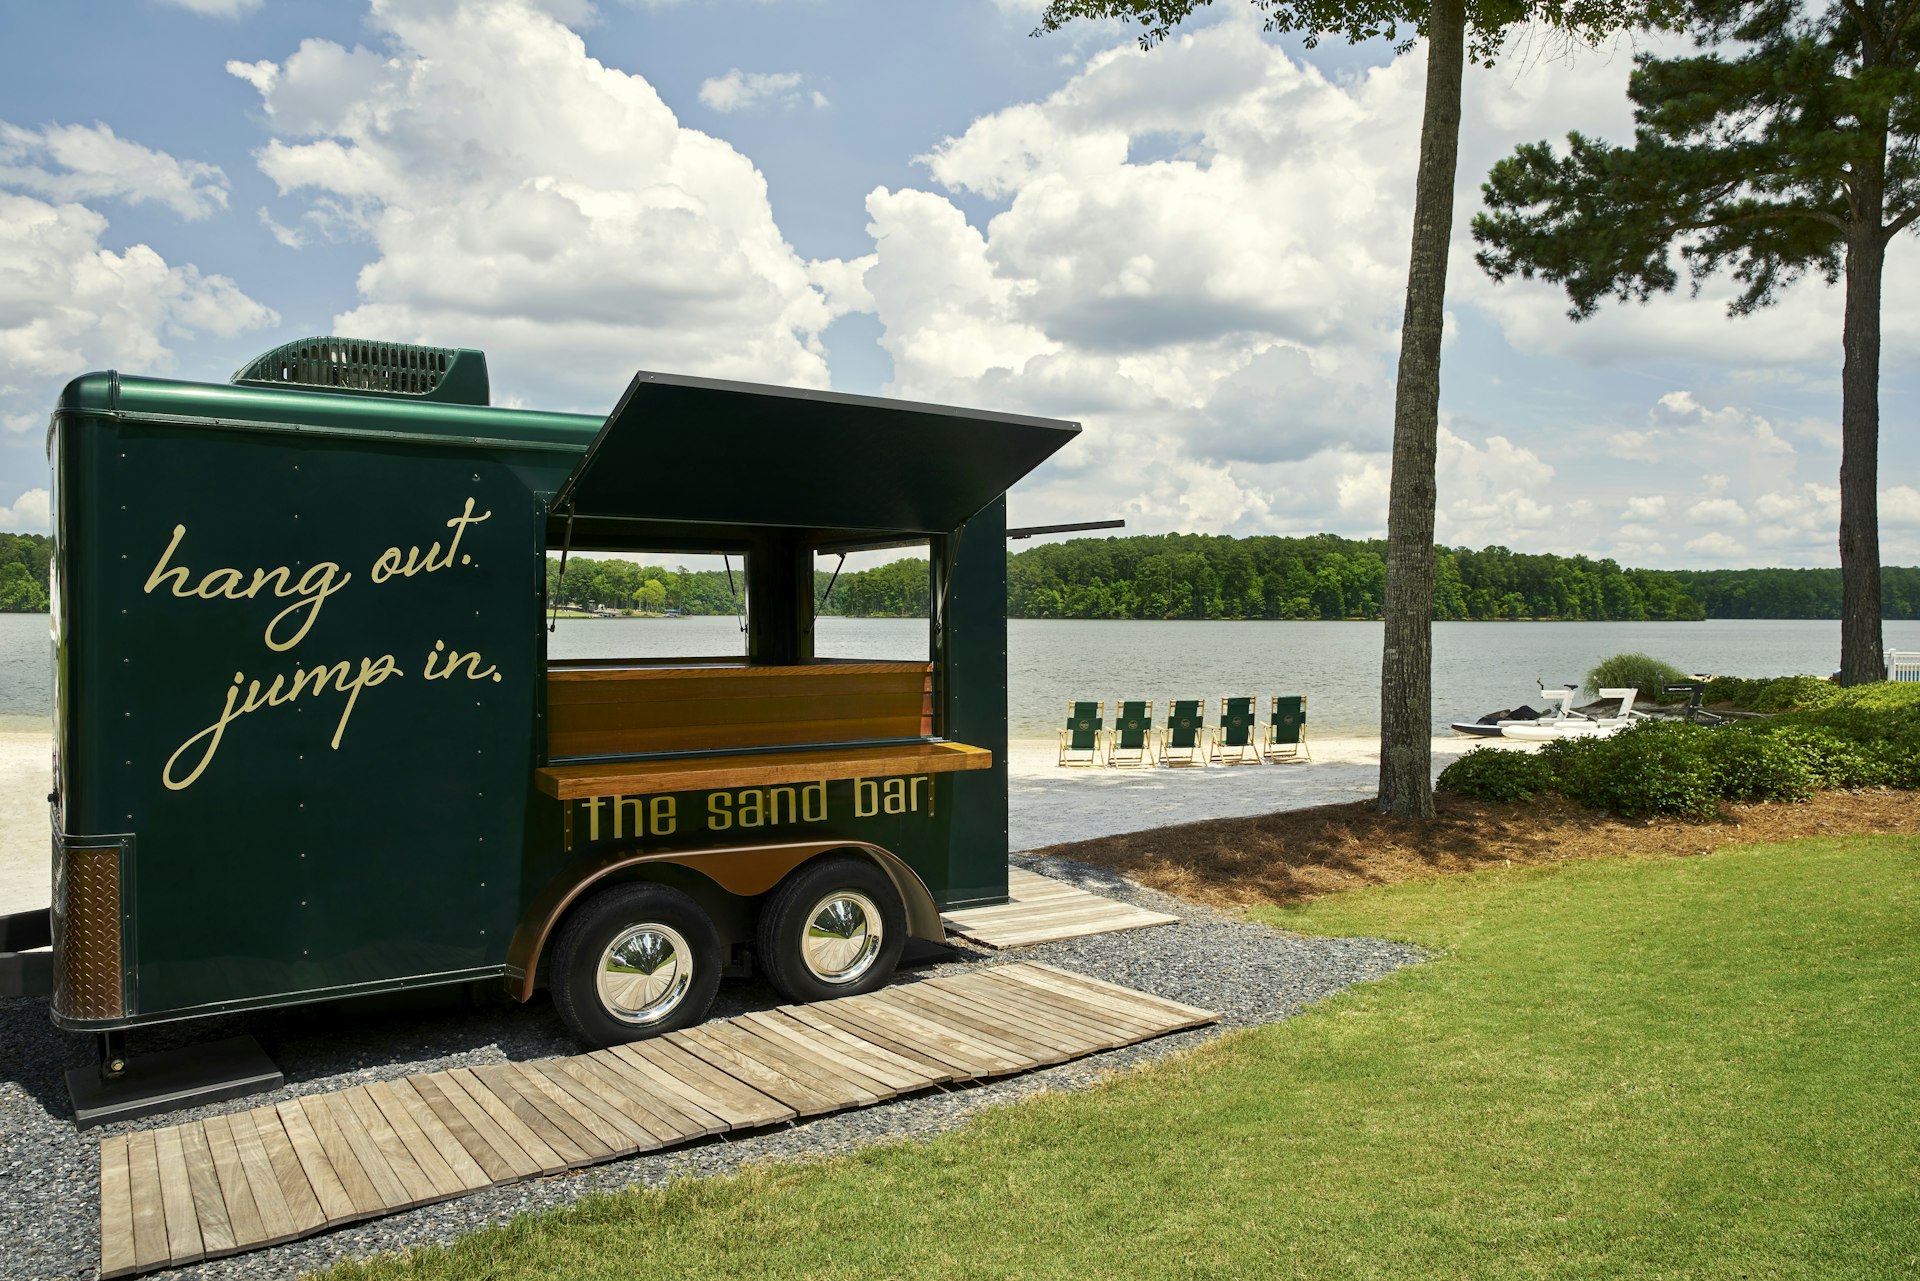 A mobile bar with the words "hang out, jump in" painted on the side is parked by the side of a lake, with several sunloungers nearby